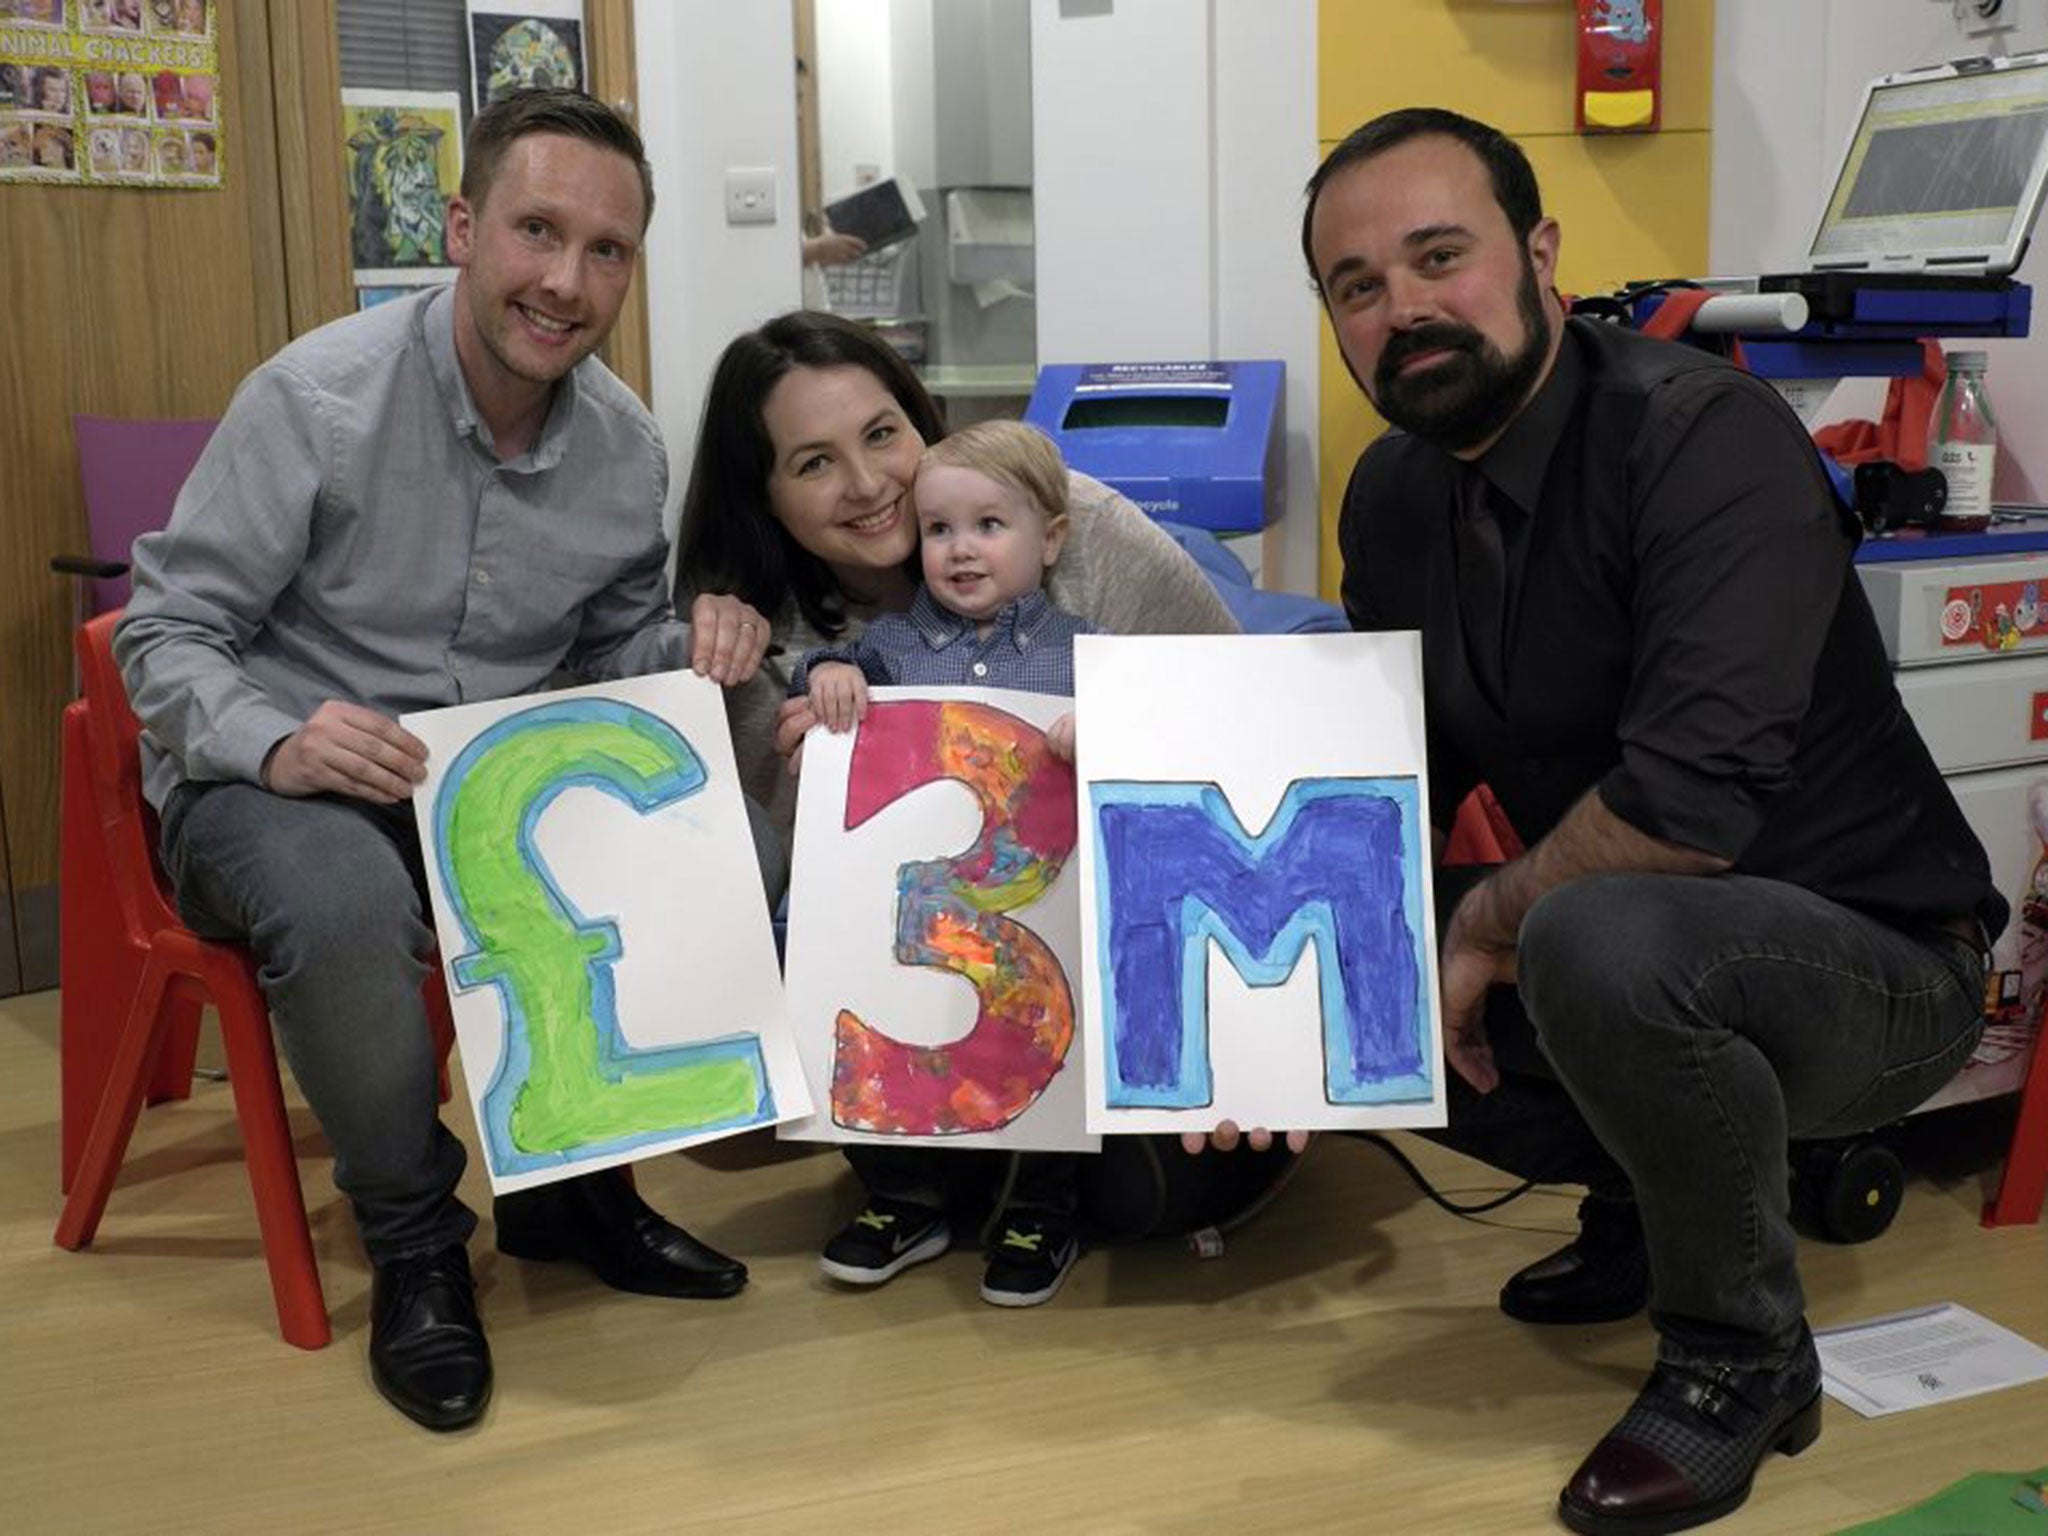 Elliott Livingstone, a patient at GOSH, and his parents, Adrian and Candace, celebrate with Evgeny Lebedev, owner of ‘The Independent’